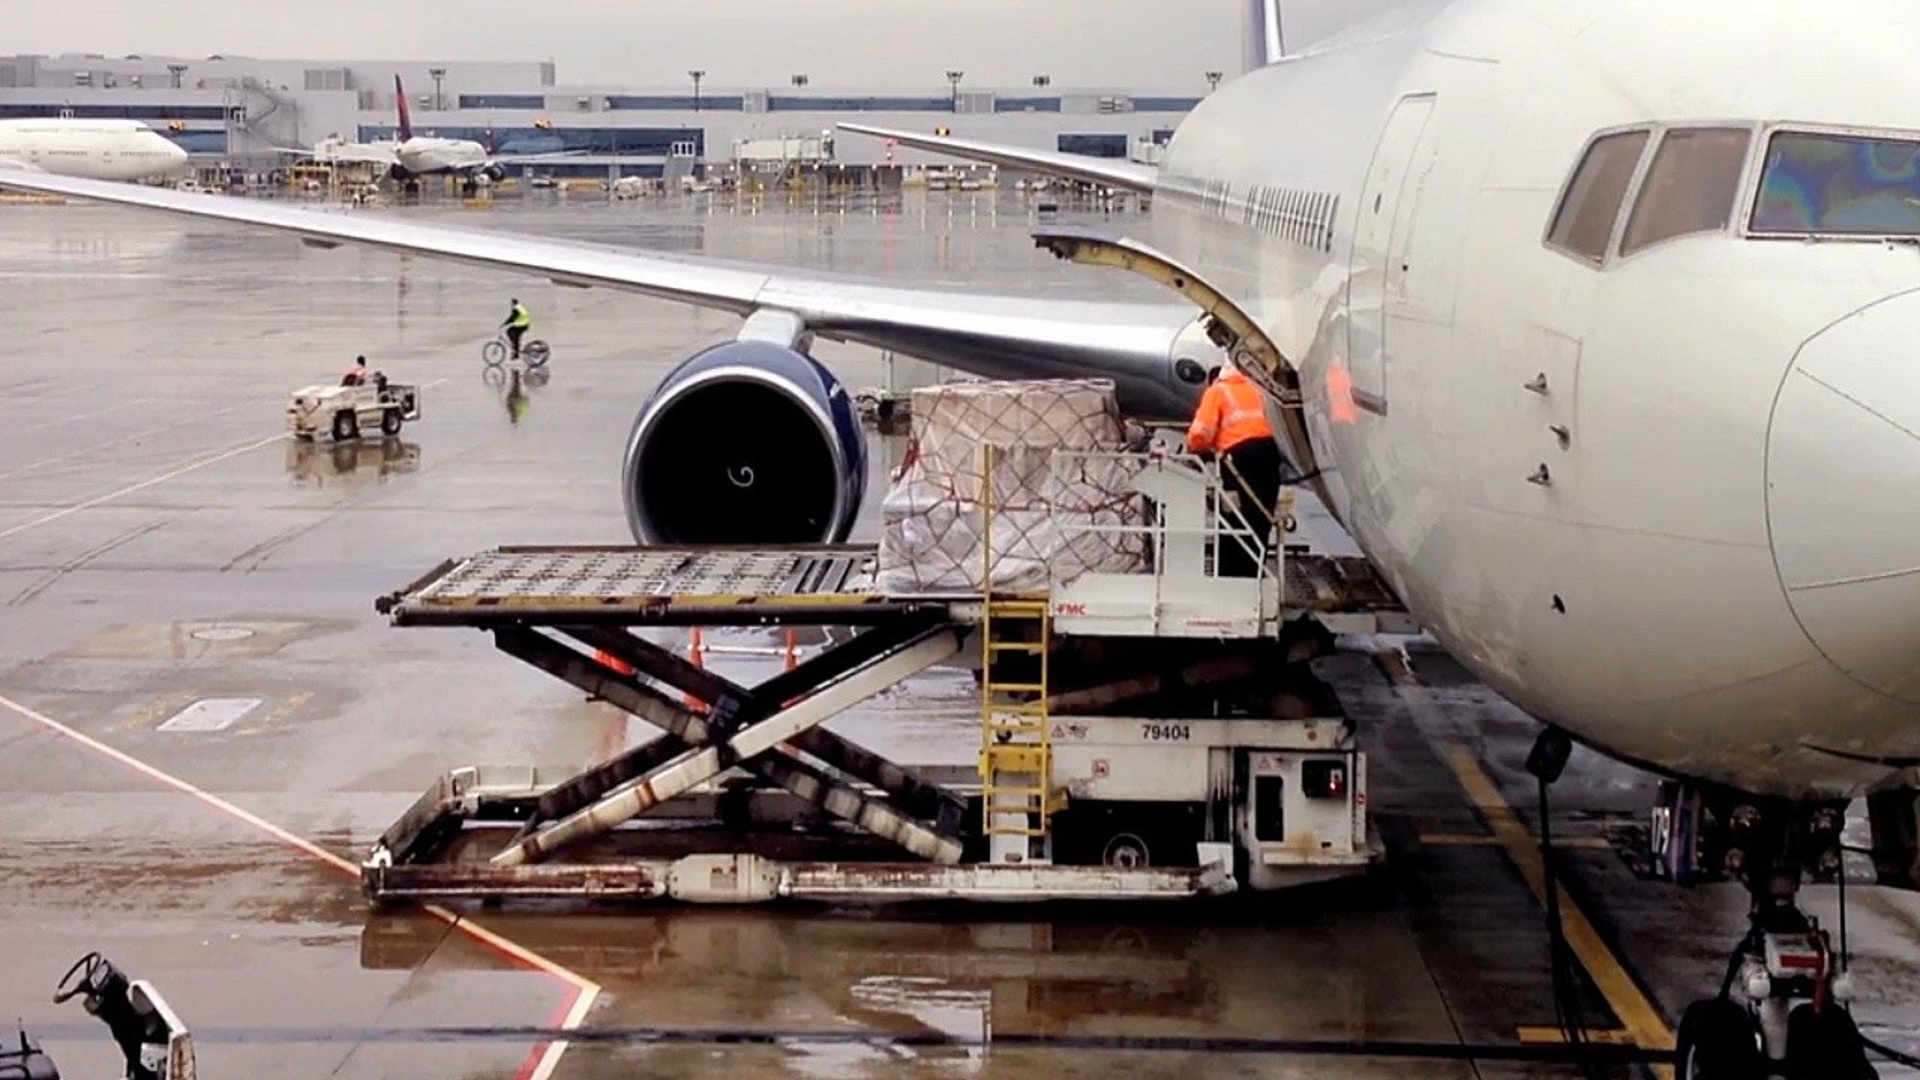 Image of aircraft being loaded